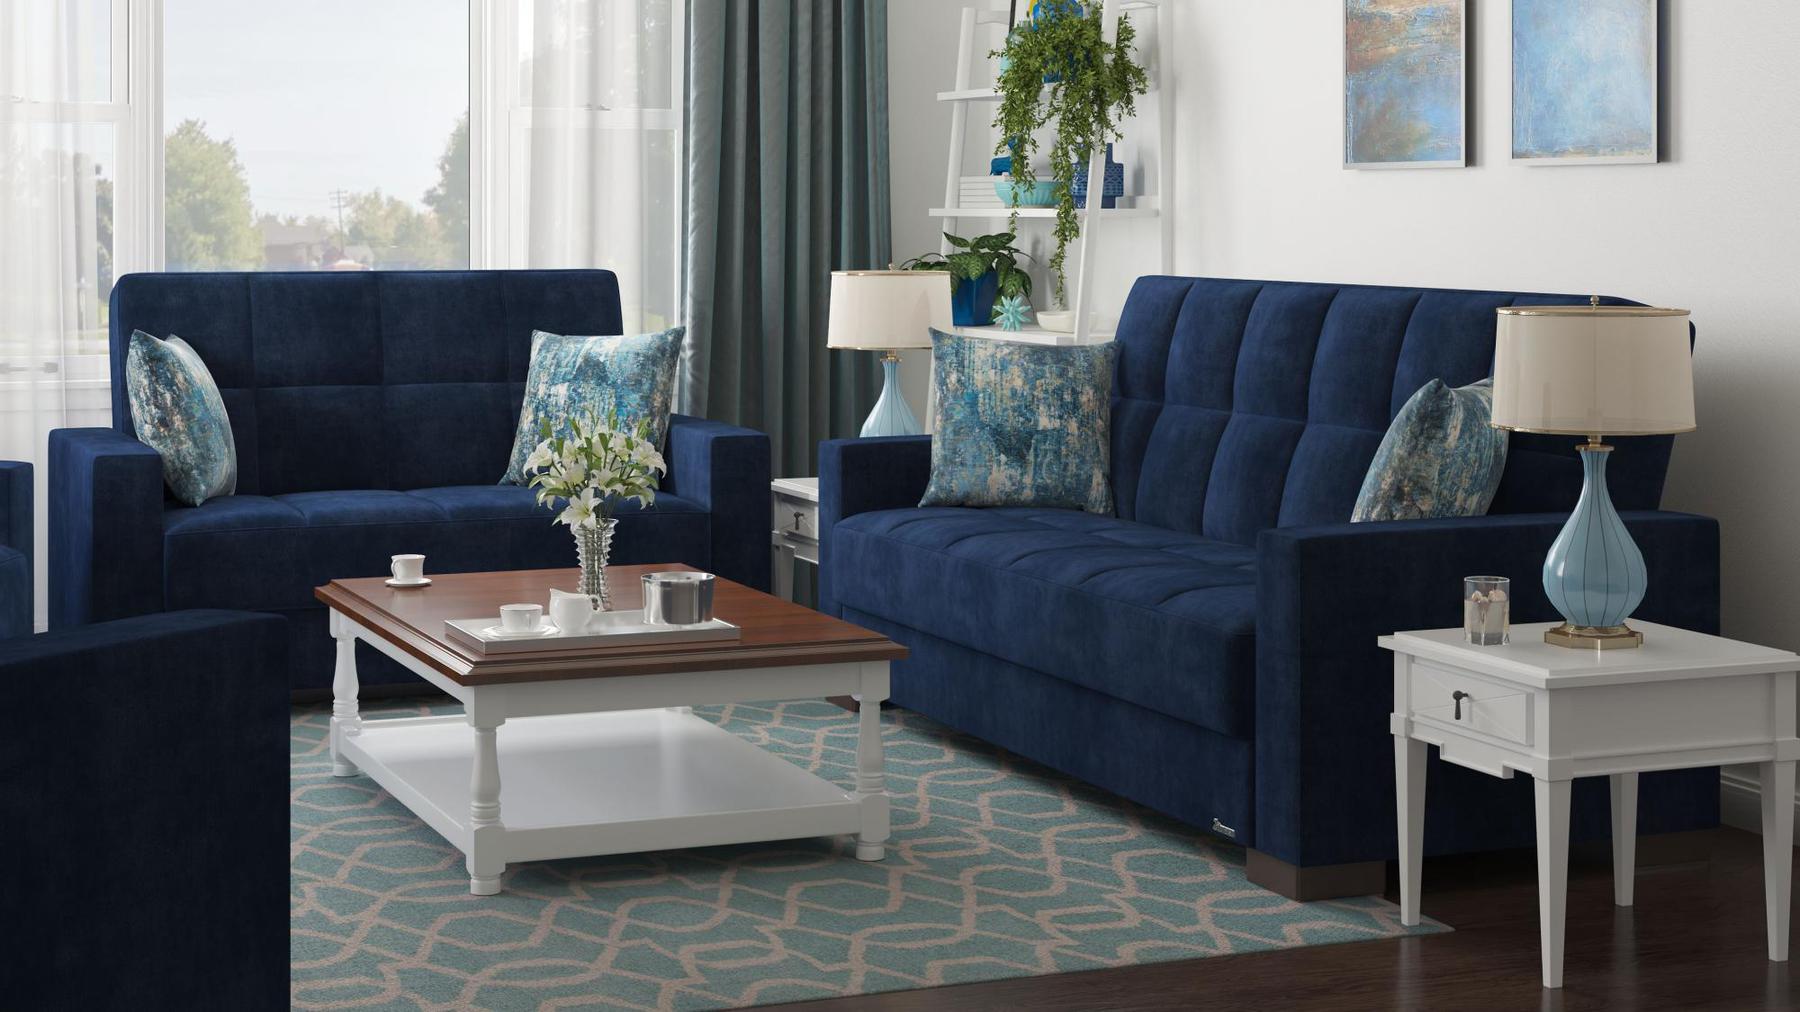 Modern design, True Blue , Microfiber upholstered convertible sleeper Loveseat with underseat storage from Voyage Track by Ottomanson in living room lifestyle setting with another piece of furniture. This Loveseat measures 67 inches width by 36 inches depth by 41 inches height.